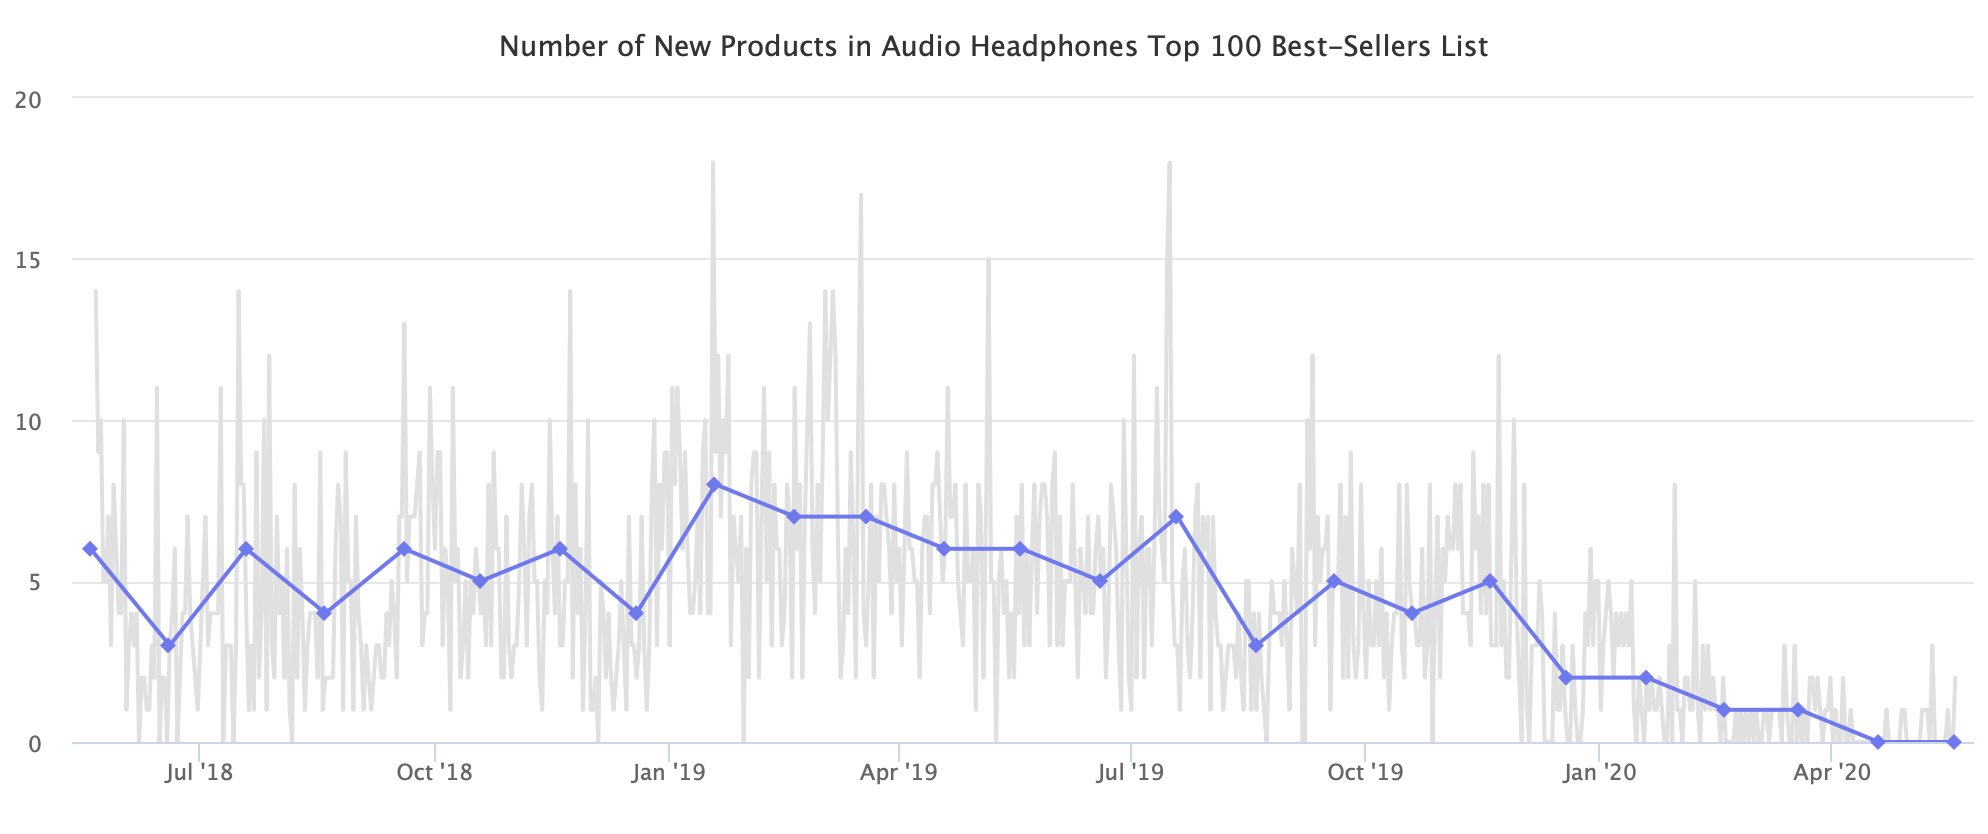 Number of New Products in Audio Headphones Top 100 Best-Sellers List